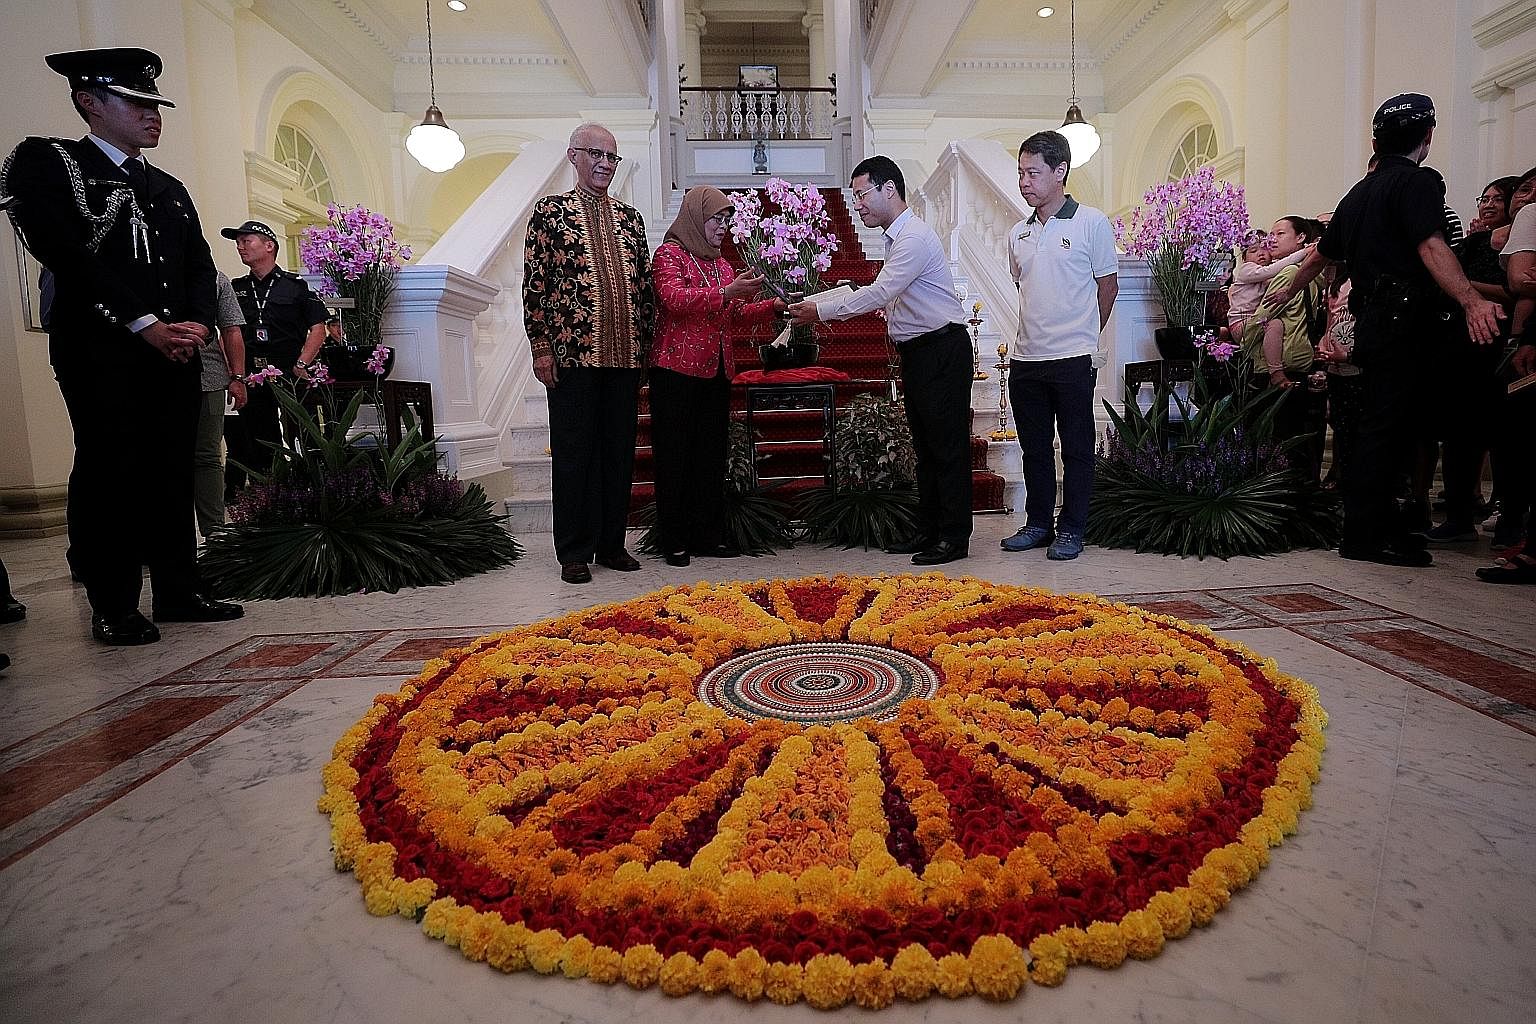 President Halimah Yacob unveiling the new Bicentennial Orchid at the Istana yesterday with Second Minister for National Development Desmond Lee, who is also Minister for Social and Family Development. They are flanked by Madam Halimah's husband, Mr M